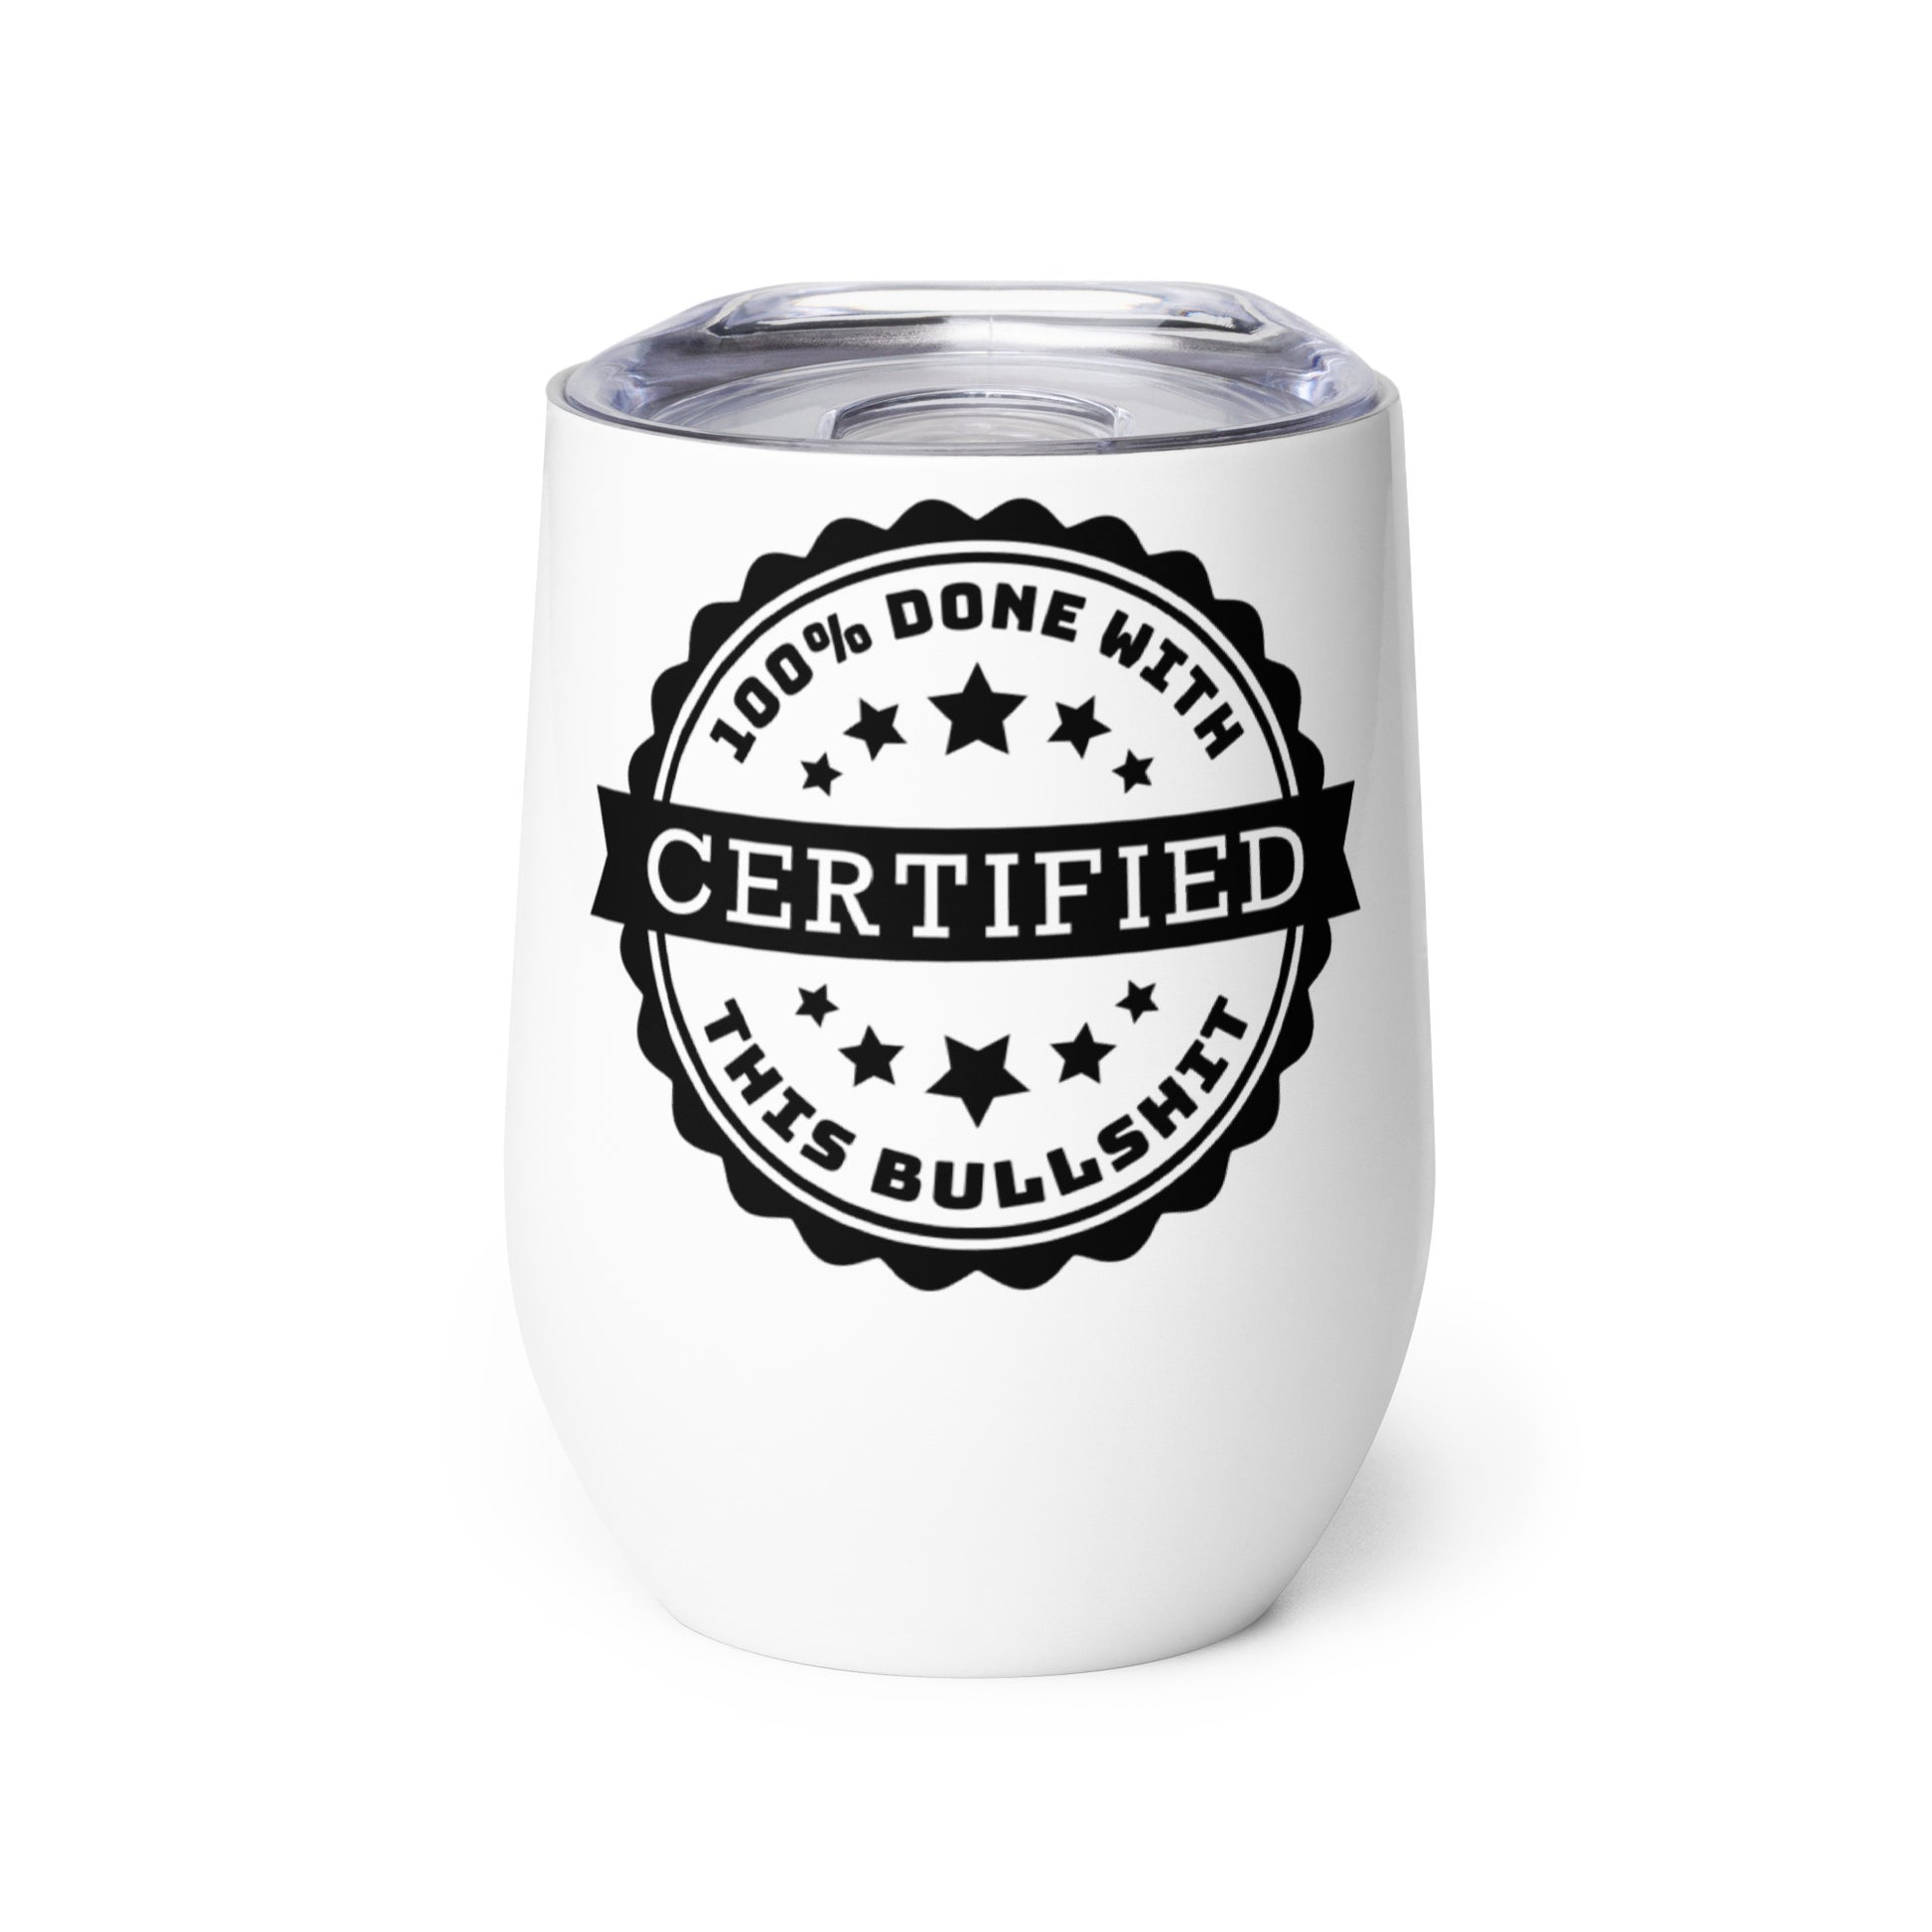 A white wine tumbler with a clear plastic lid. Centered on the tumbler is an image of an official-looking stamped seal that reads "CERTIFIED: 100% Done with this bullshit.'